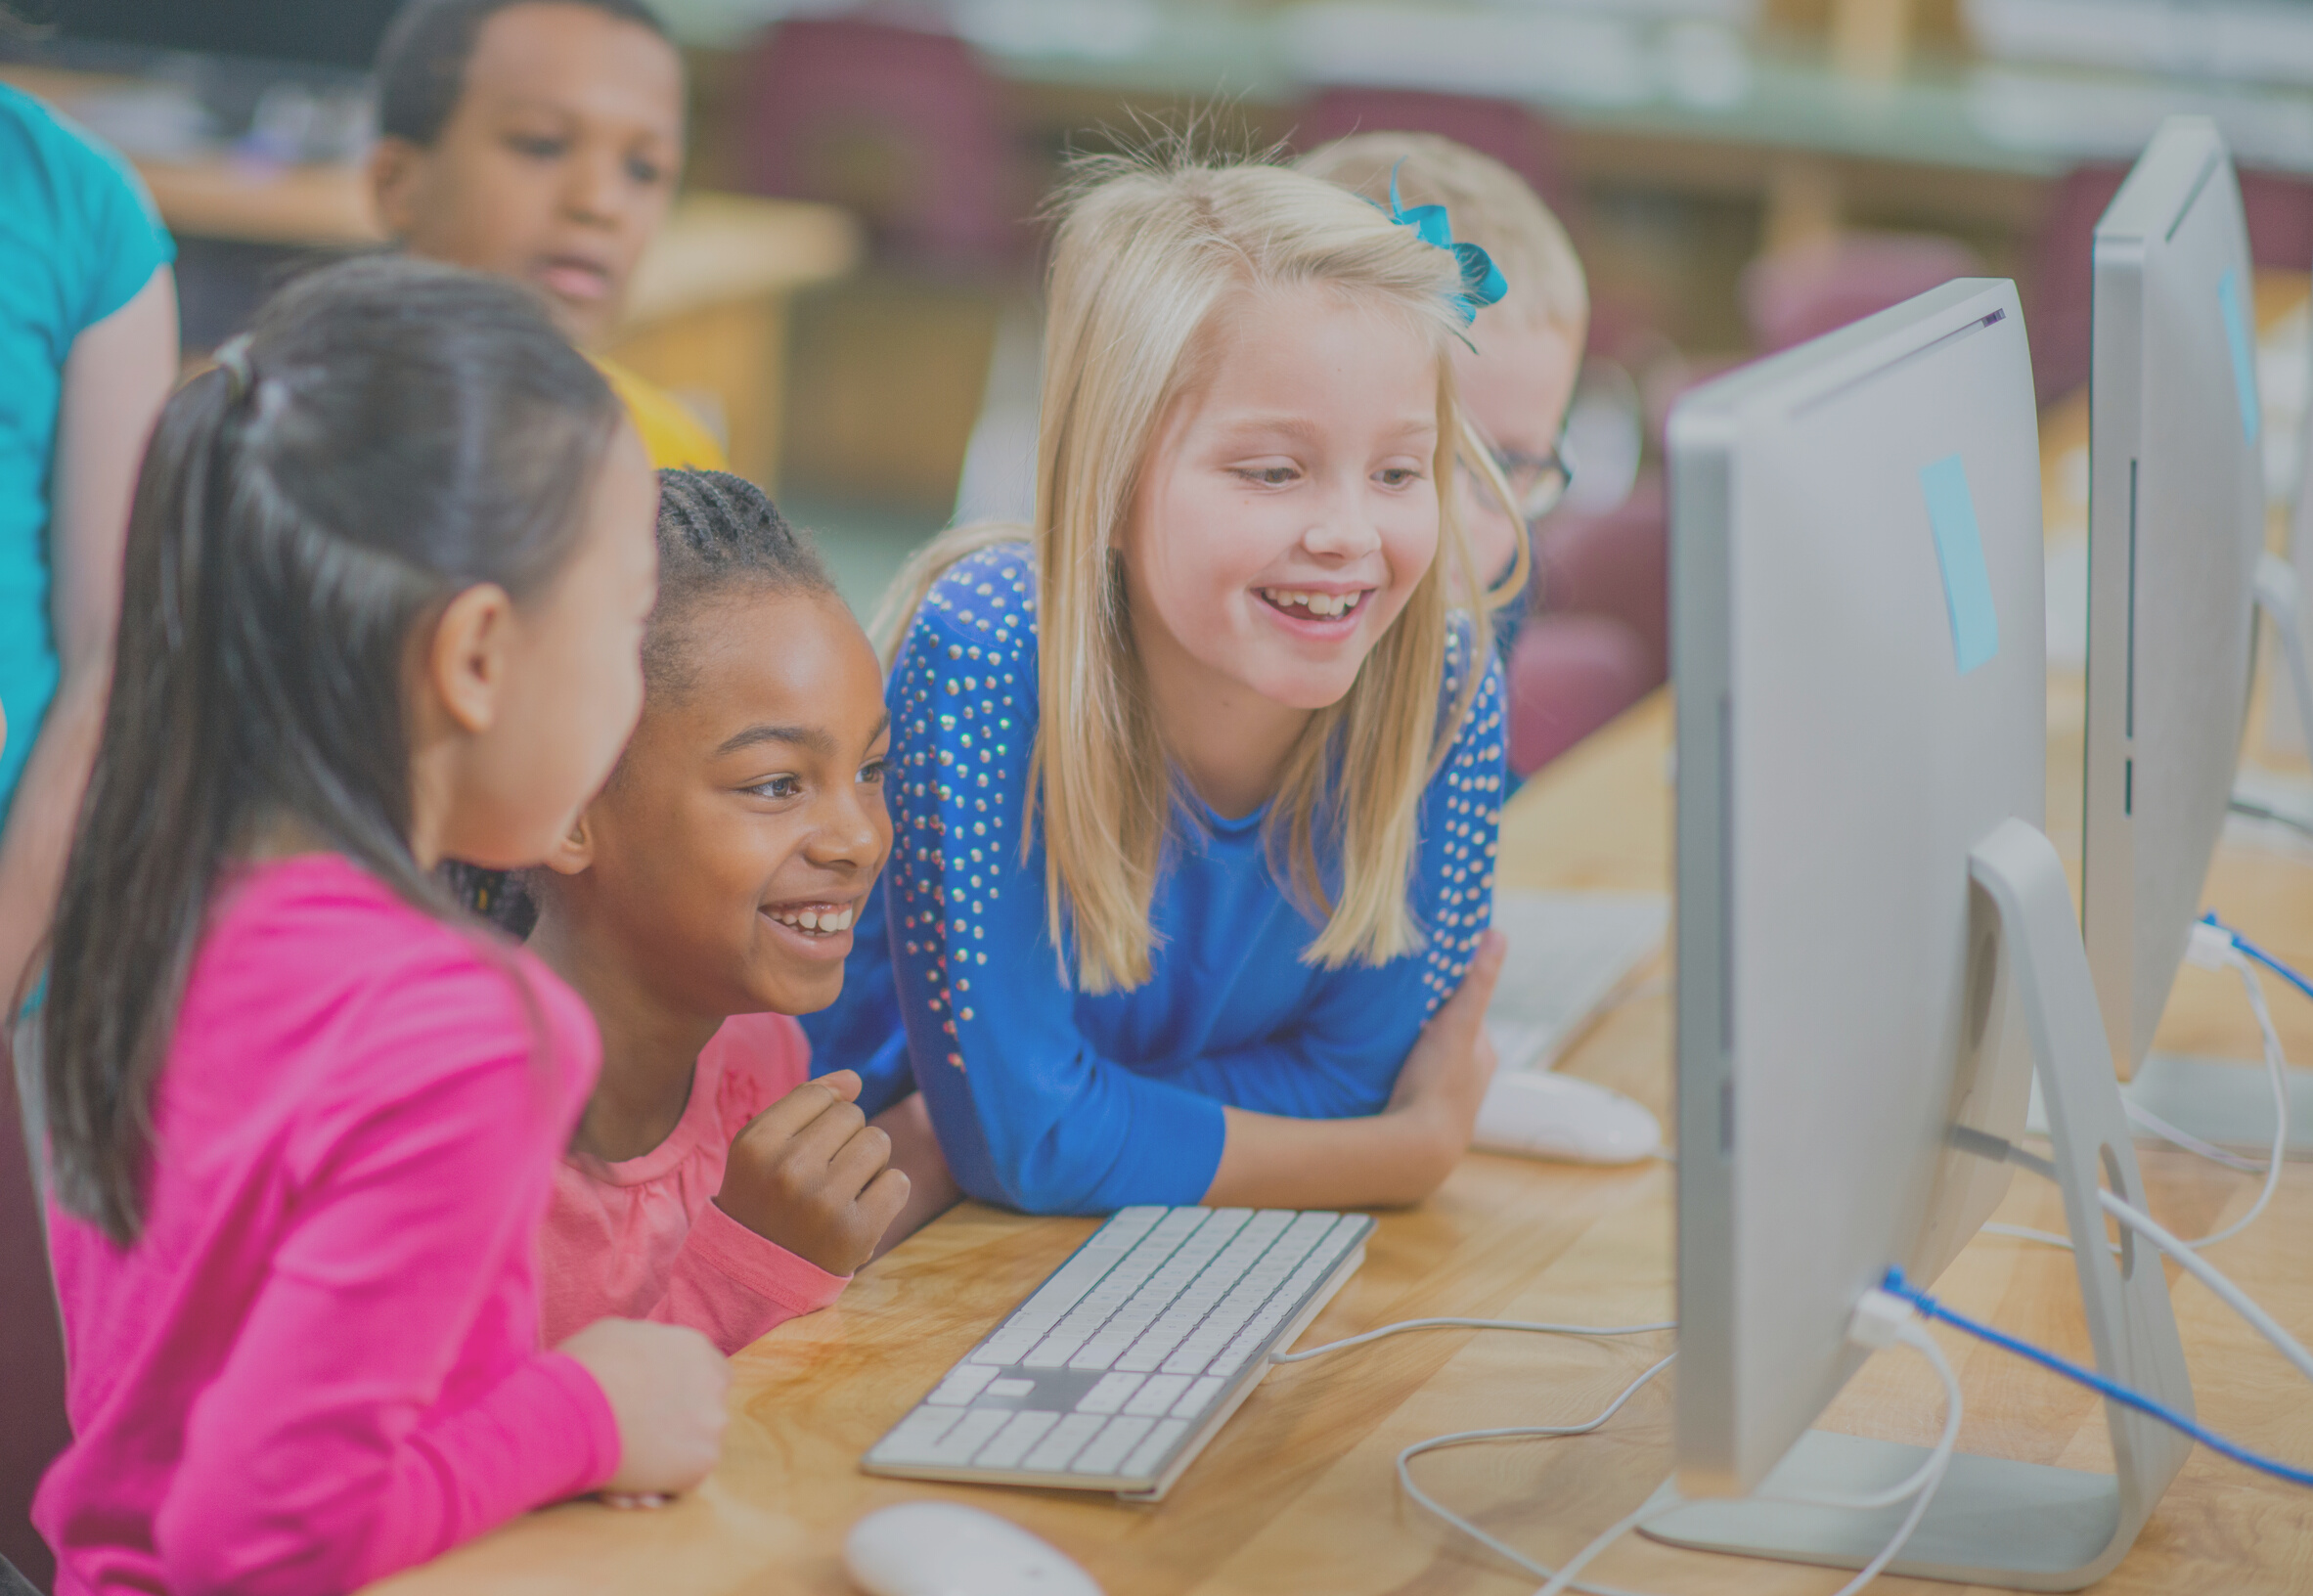 Elementary education in the computer lab